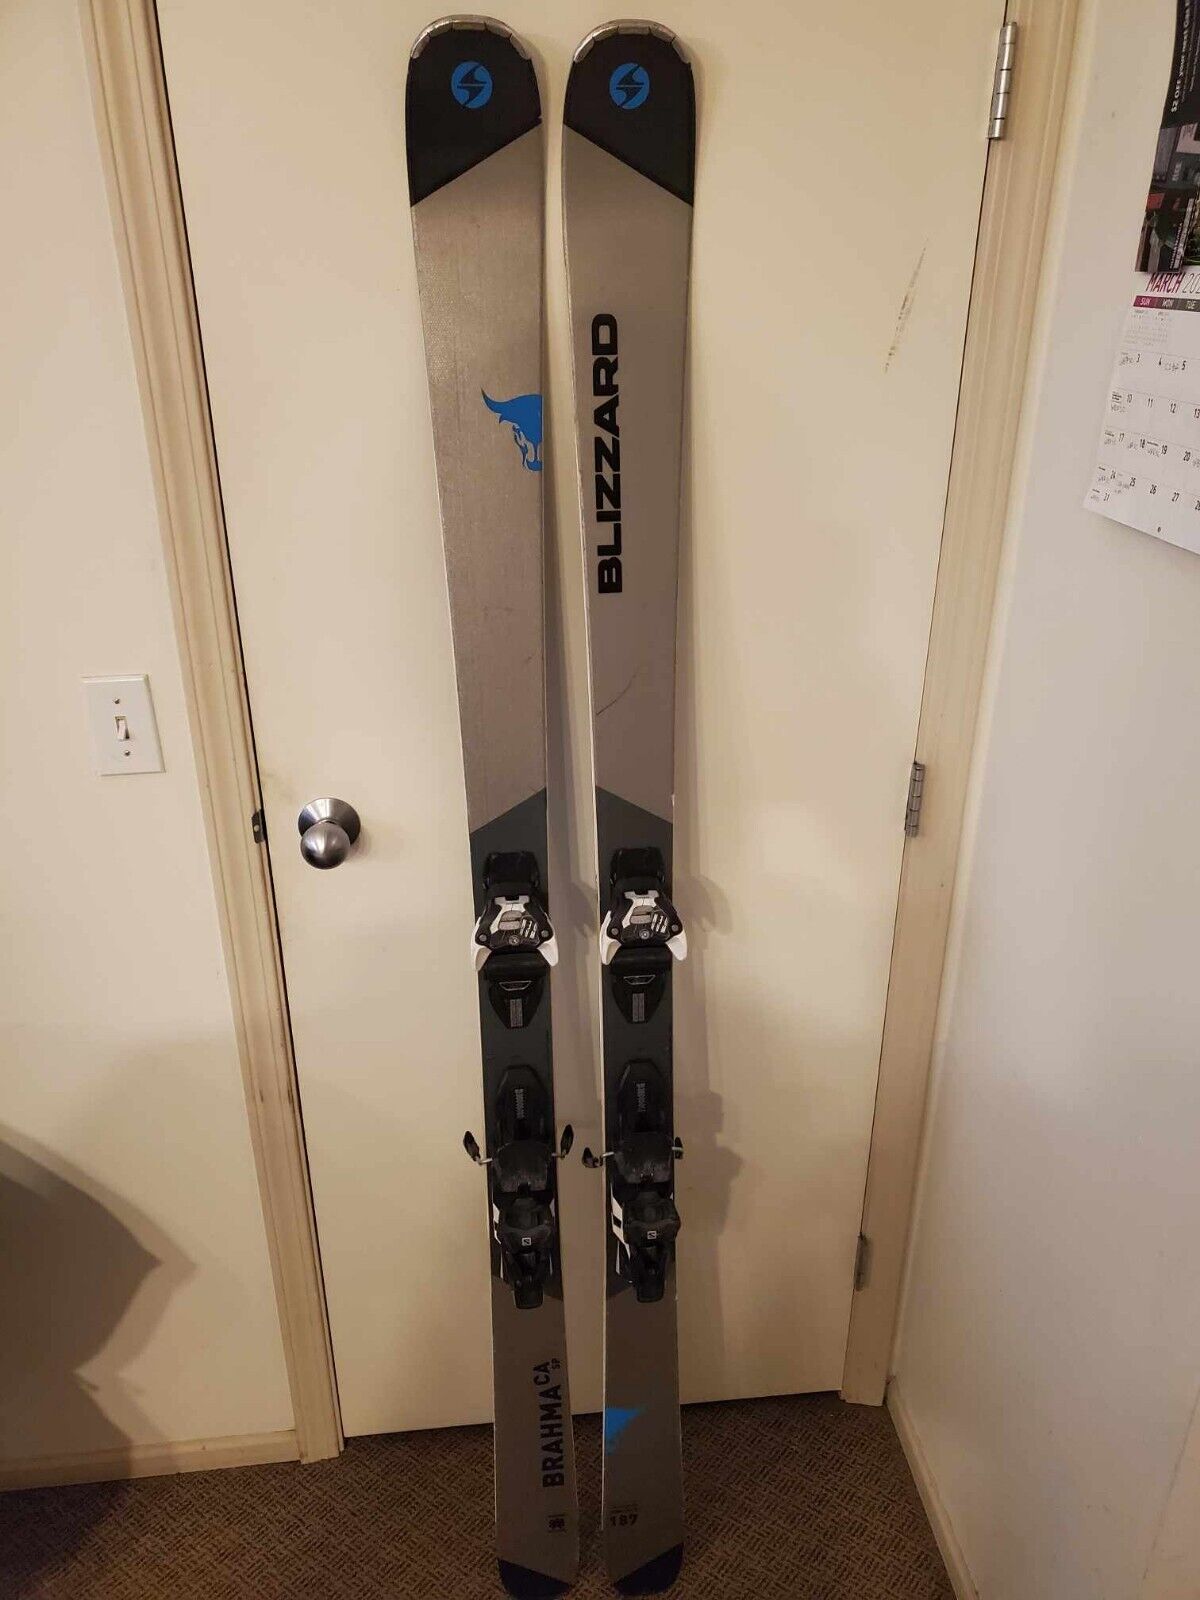 Blizzard Brahma 187 all mountain skis with fully adjustable bindings 